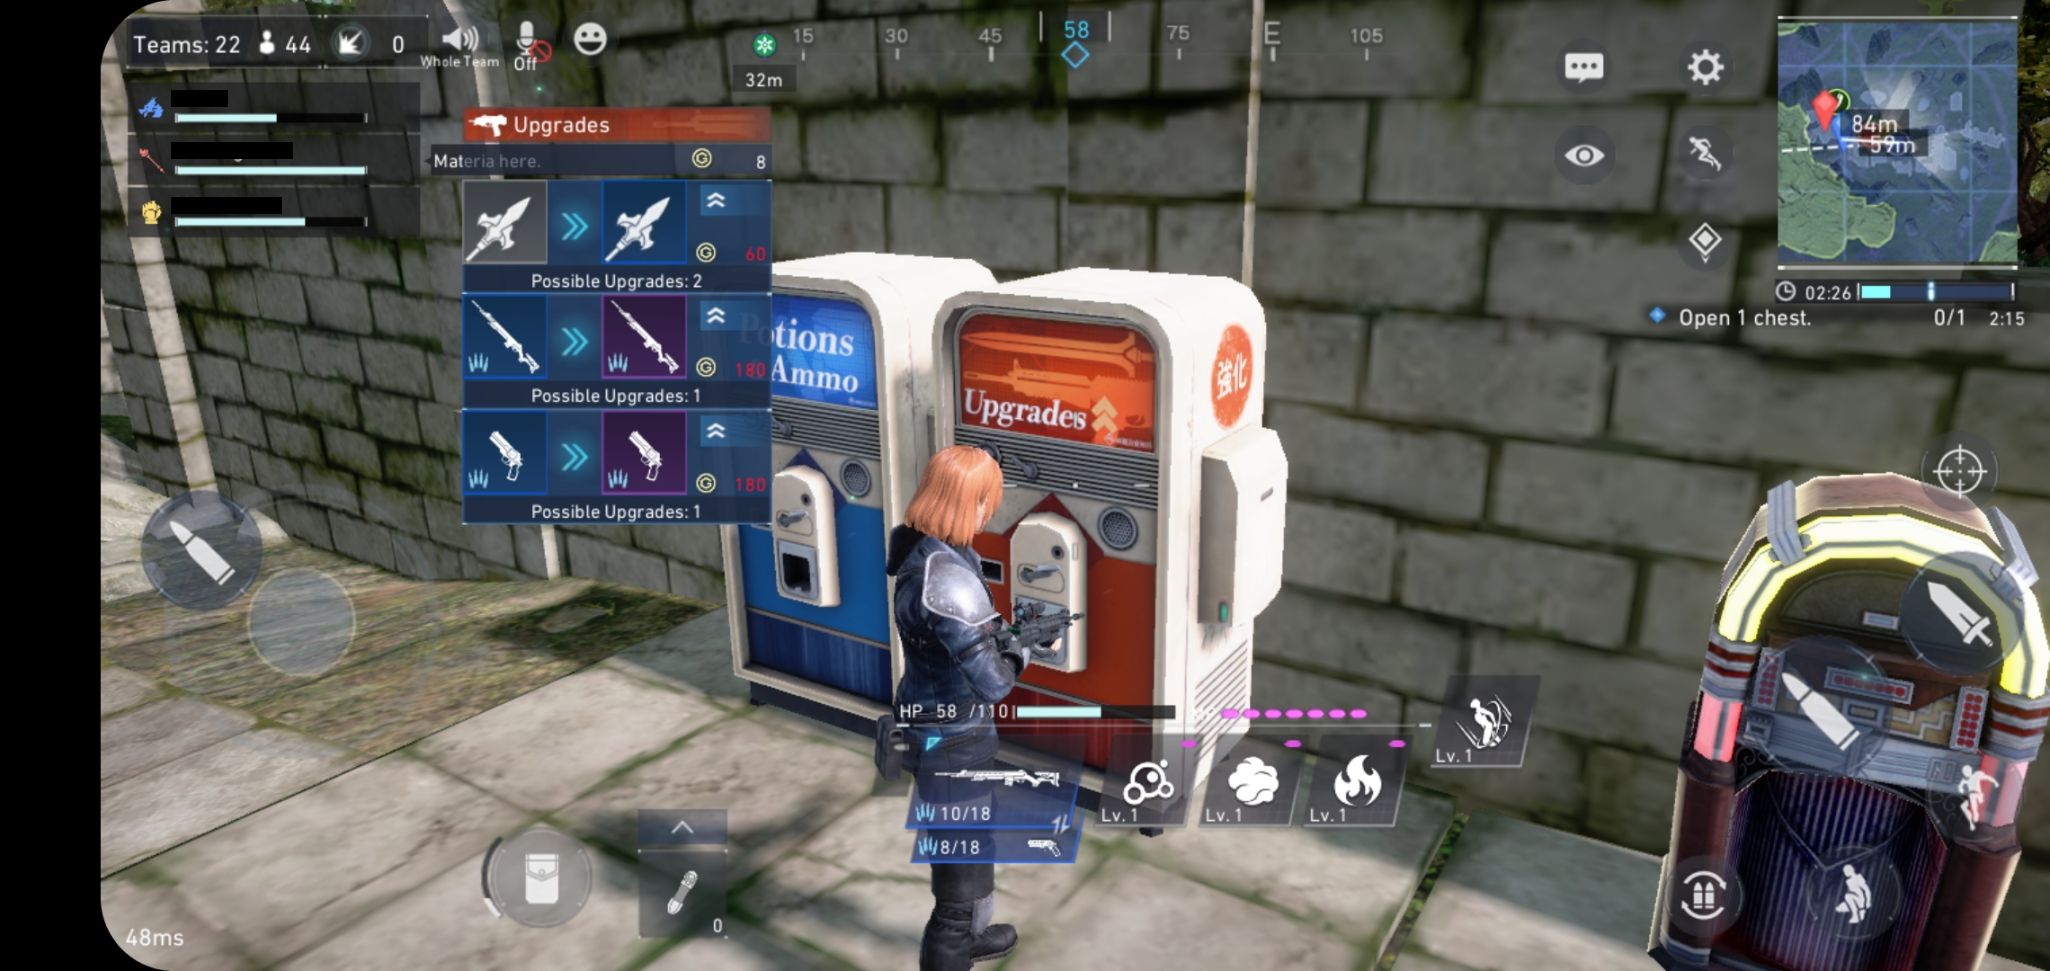 Buy upgrades and items from Final Fantasy VII: The First Soldier vending machines